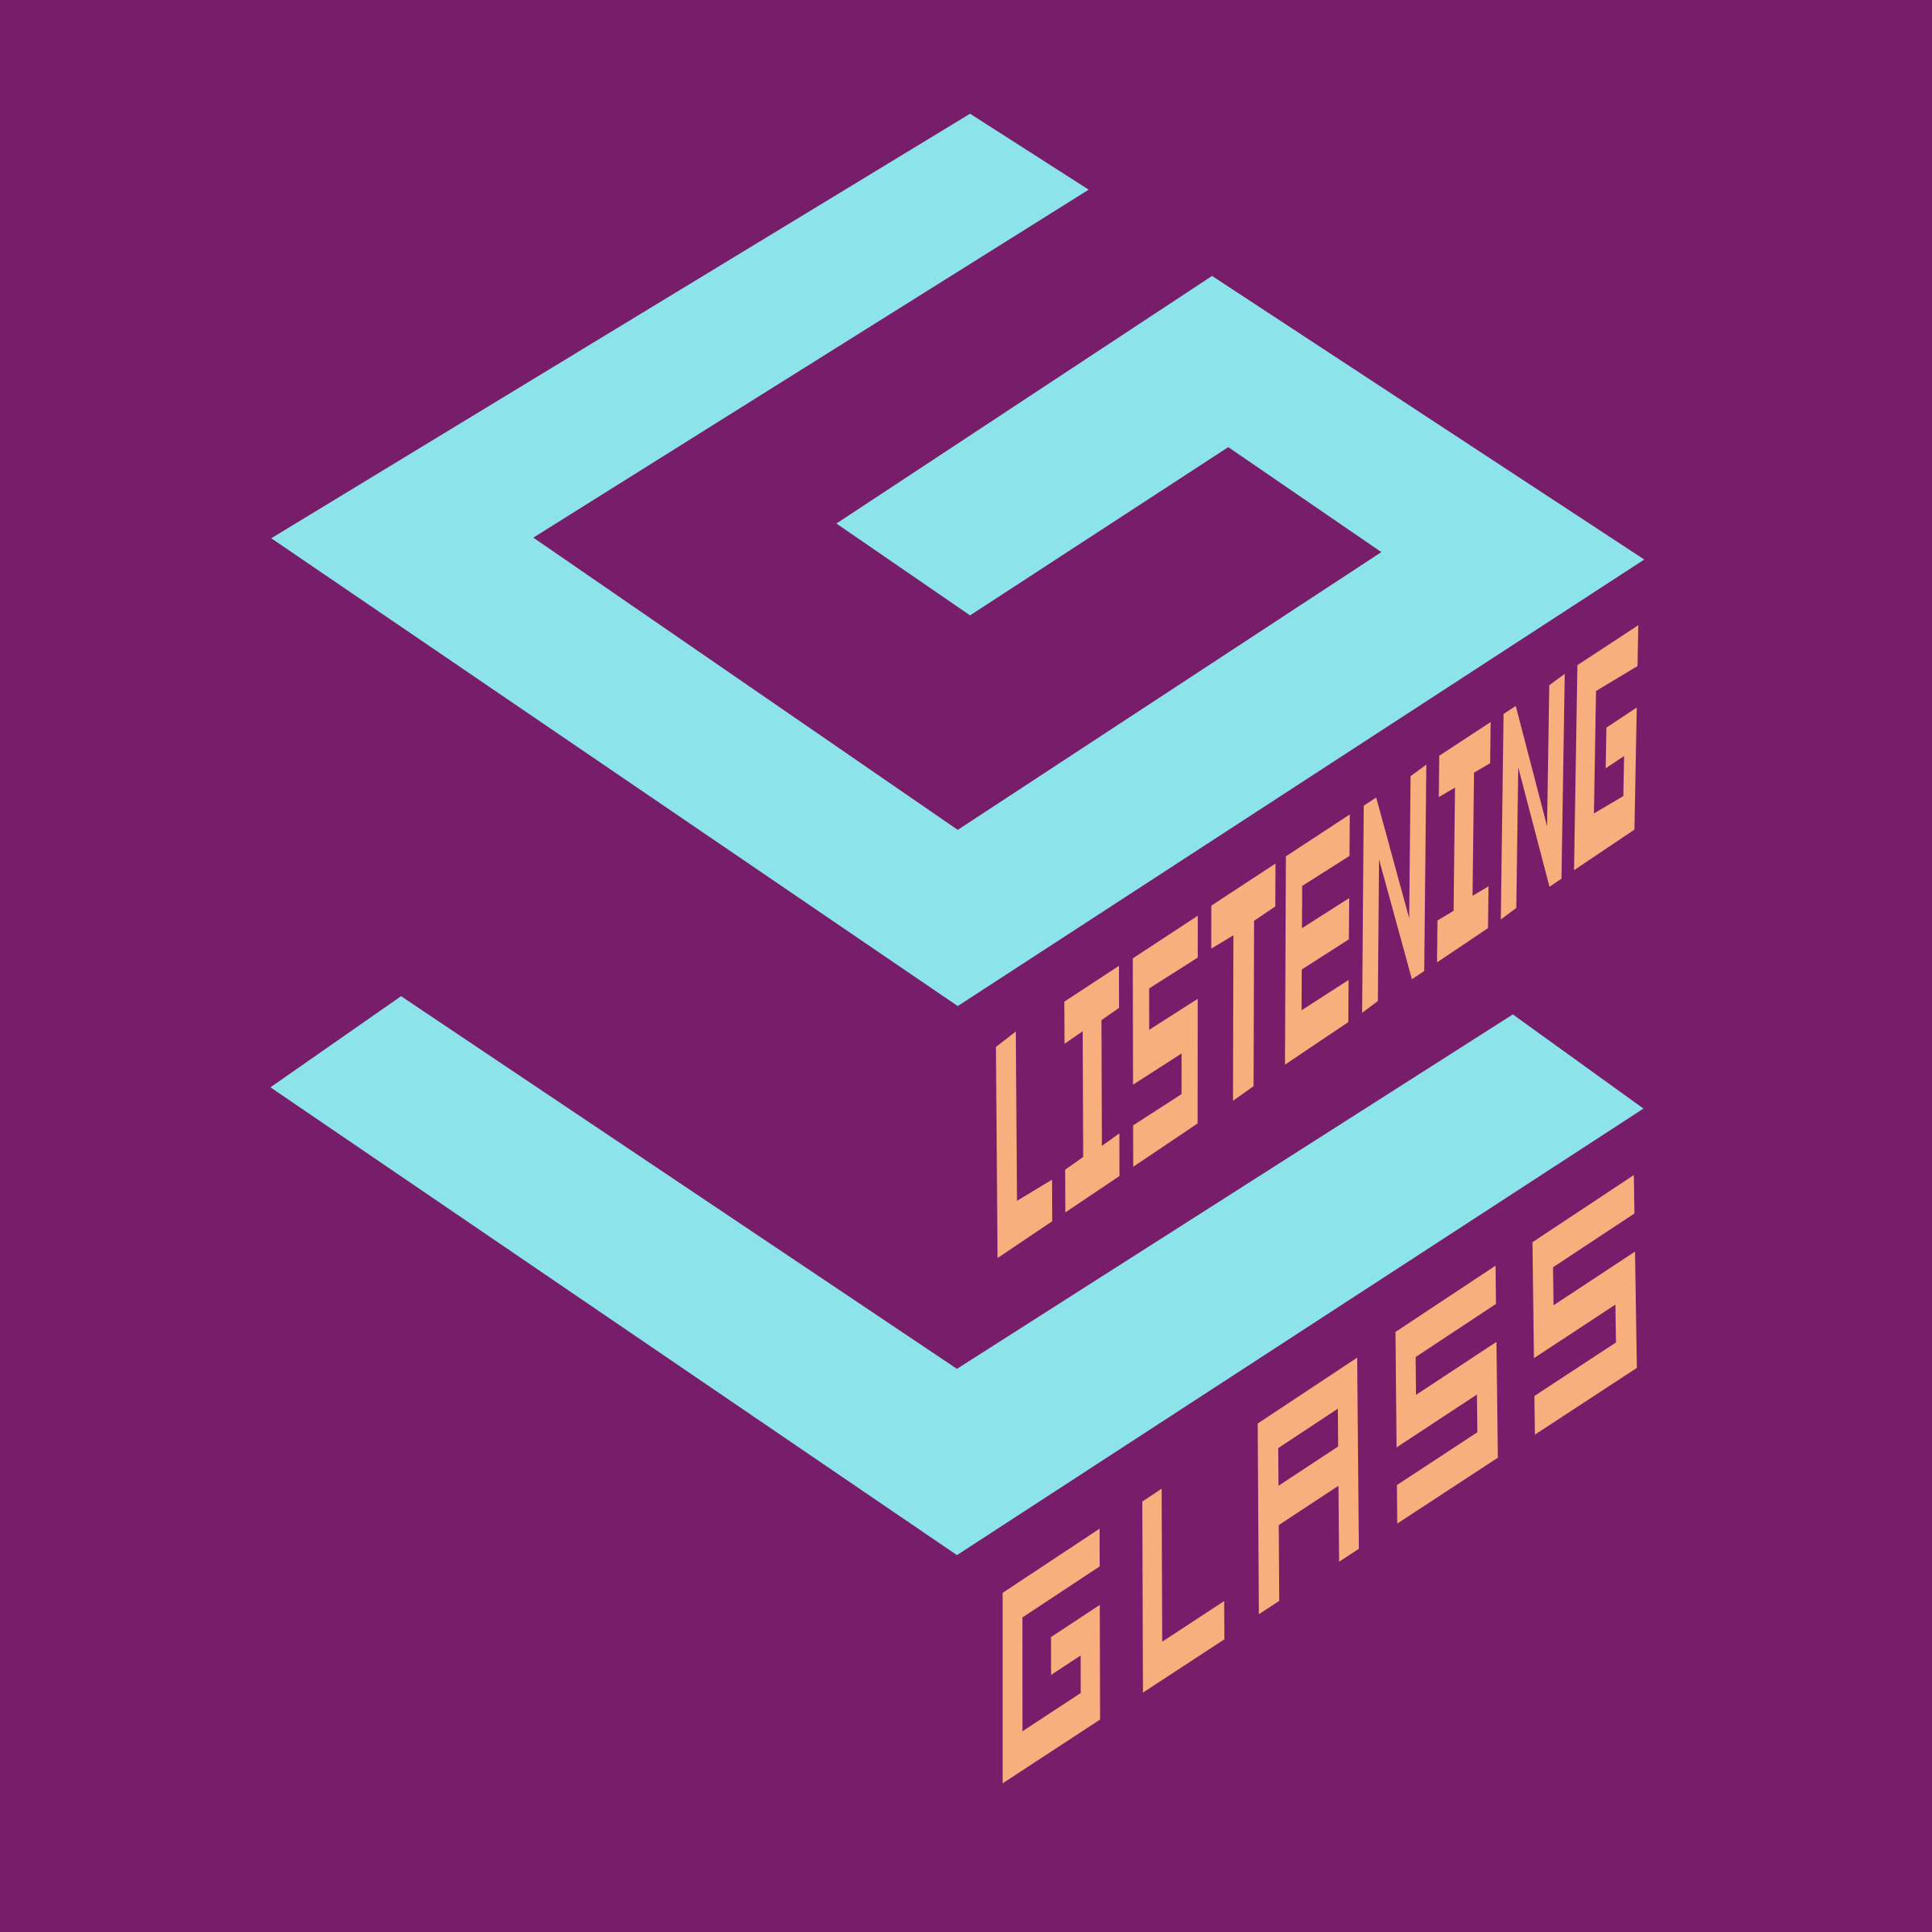 Listening Glass: Science, Technology, Philosophy, Culture